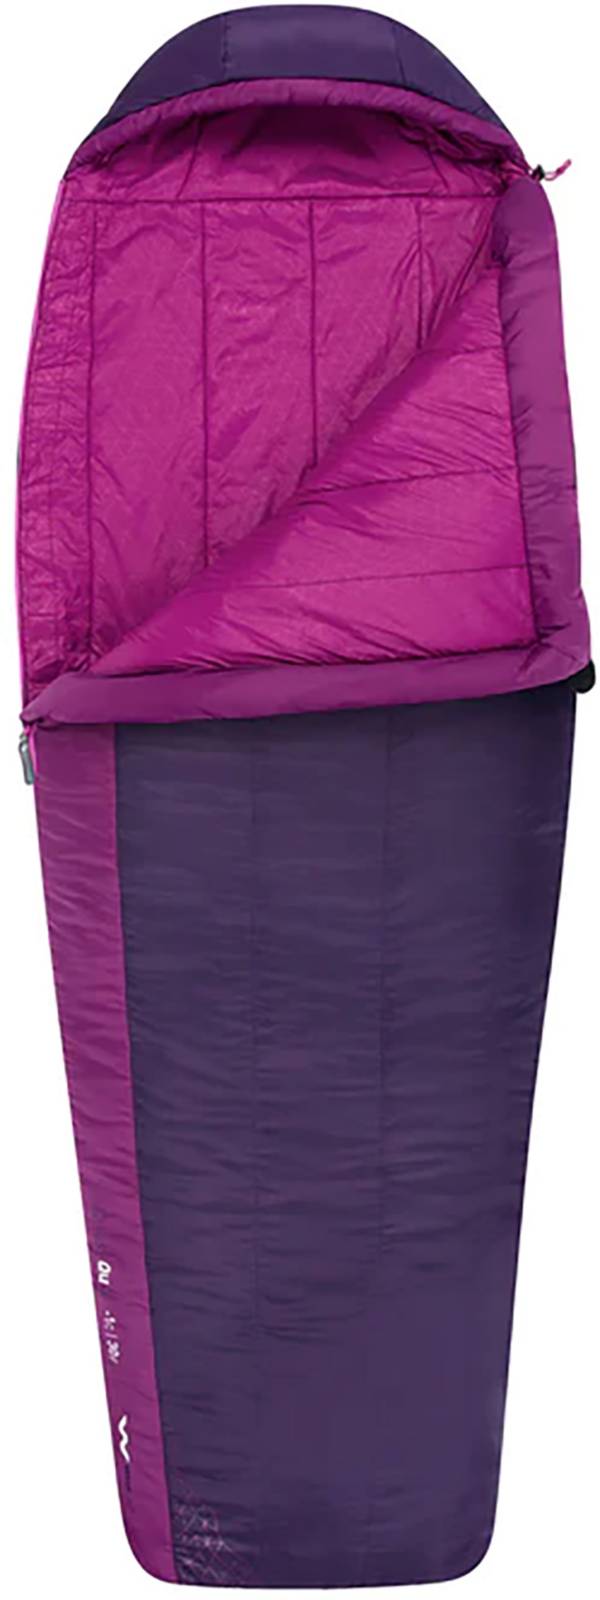 Sea to Summit Women's Quest QUII 30 Sleeping Bag product image